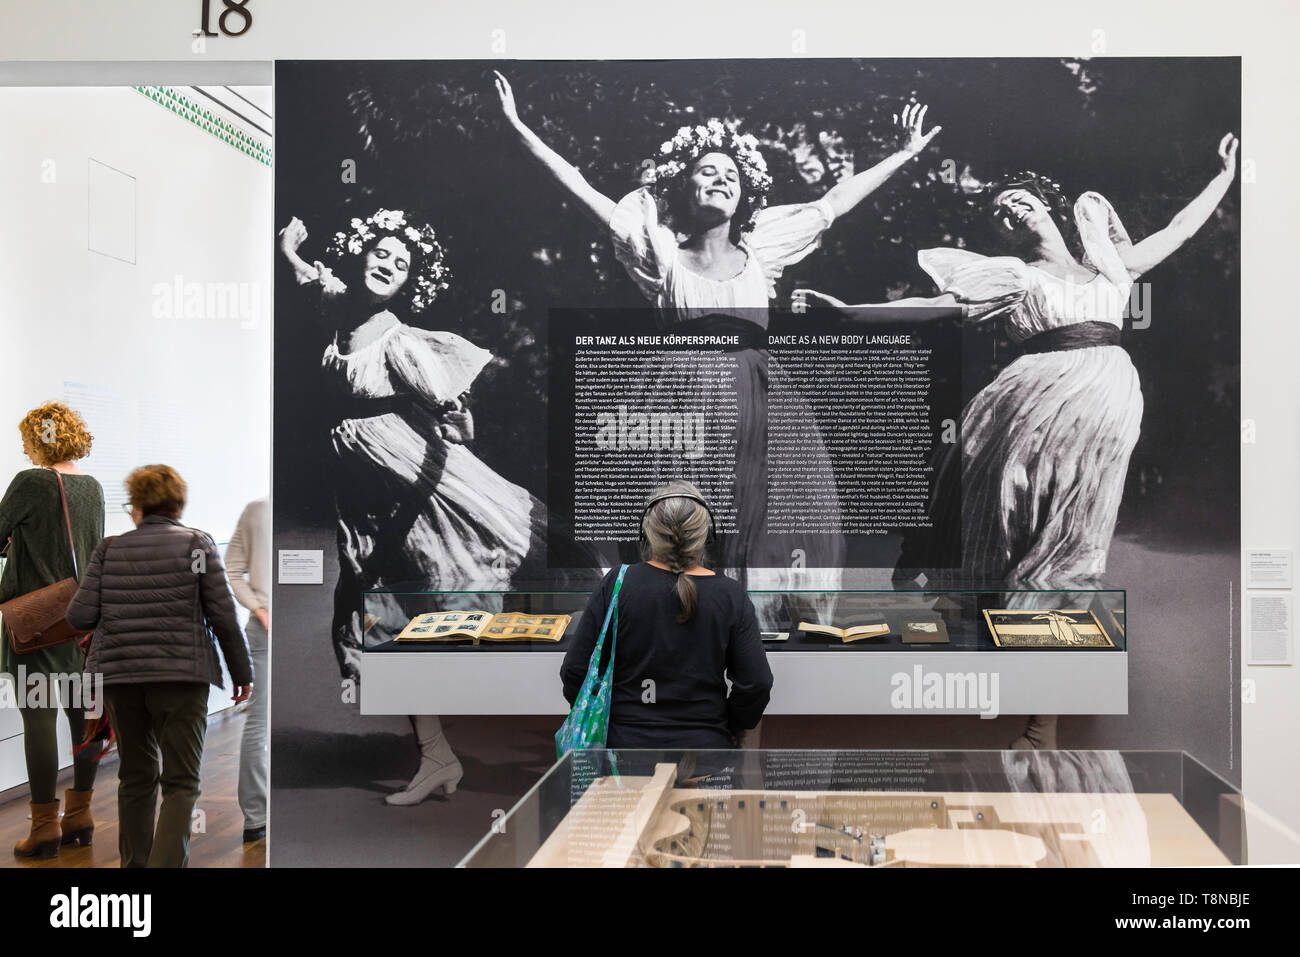 Happy women, view of a large vintage photographic image of three joyful dancing women in a display of Secession art in the Leopold Museum, Vienna Stock Photo